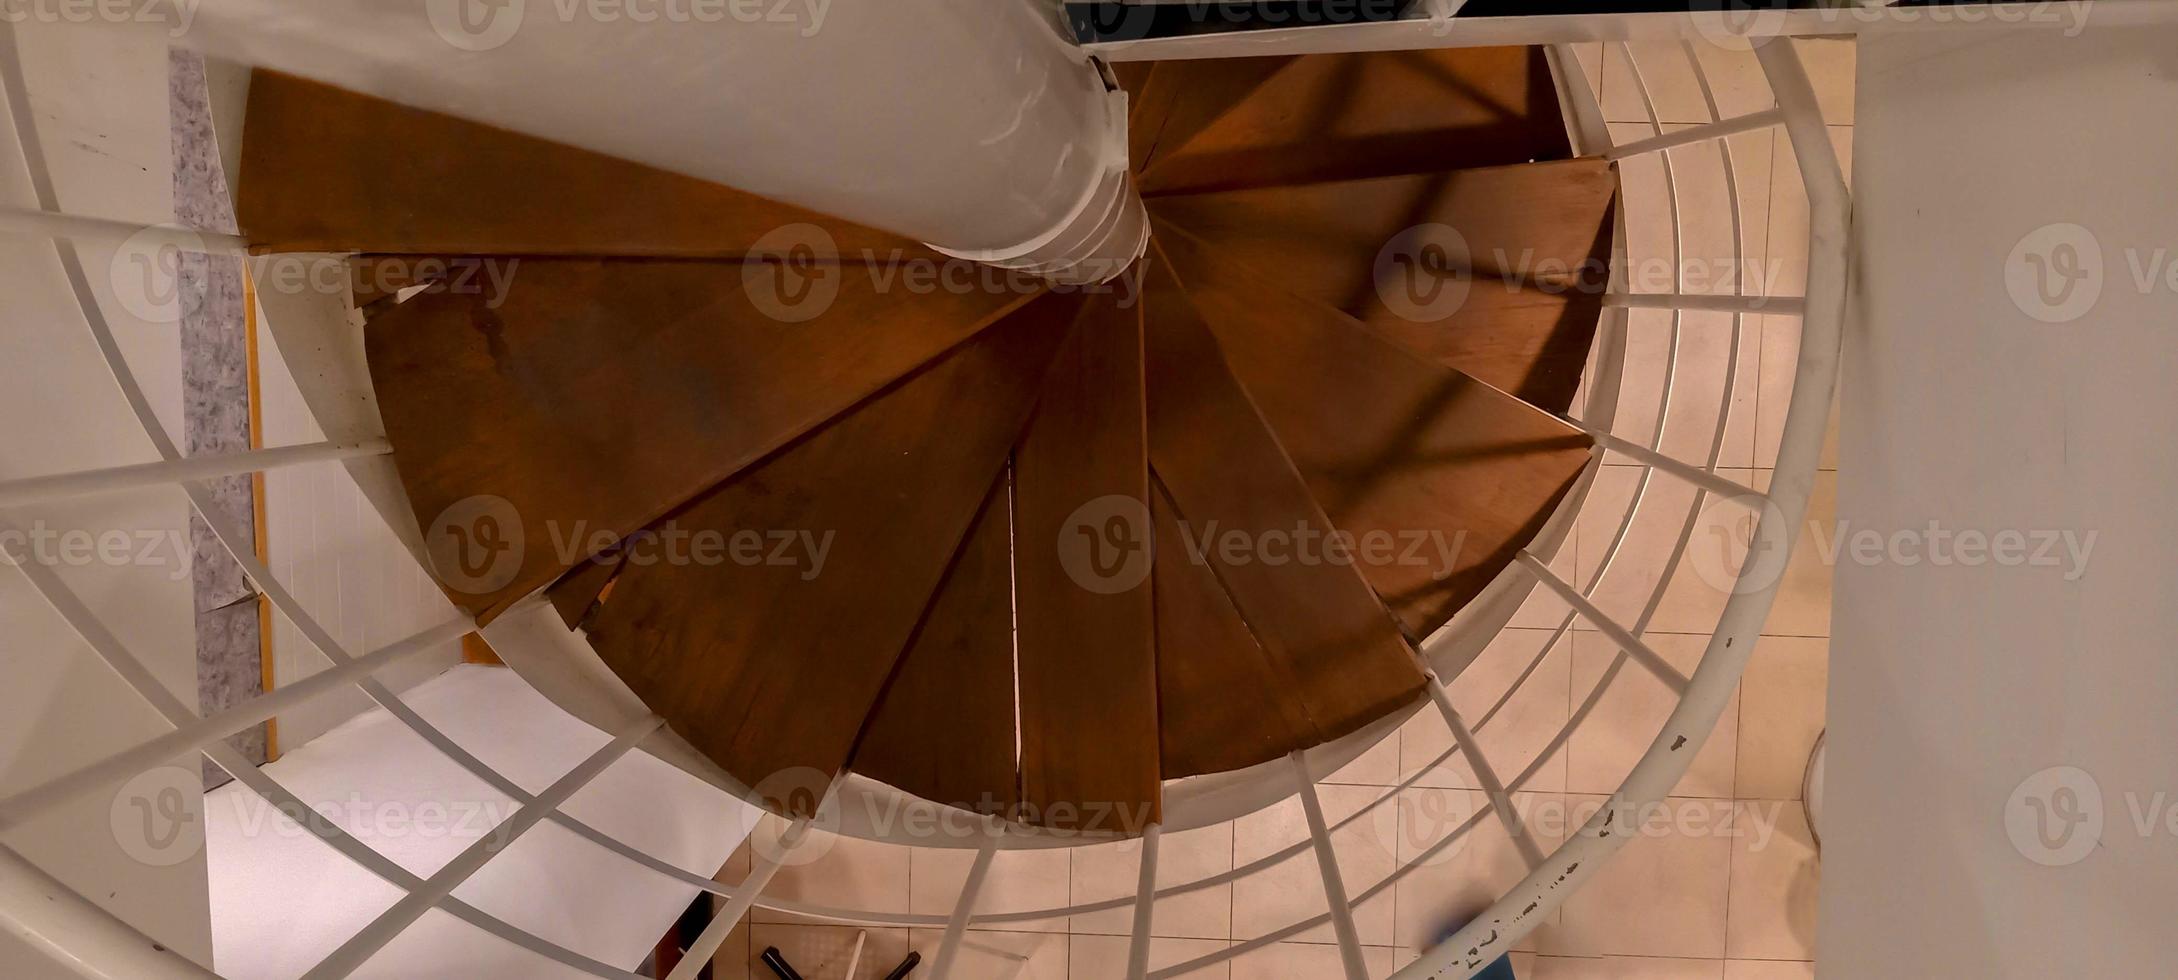 Spiral Winding Staircase, Taken from above with the white stair railings showing photo